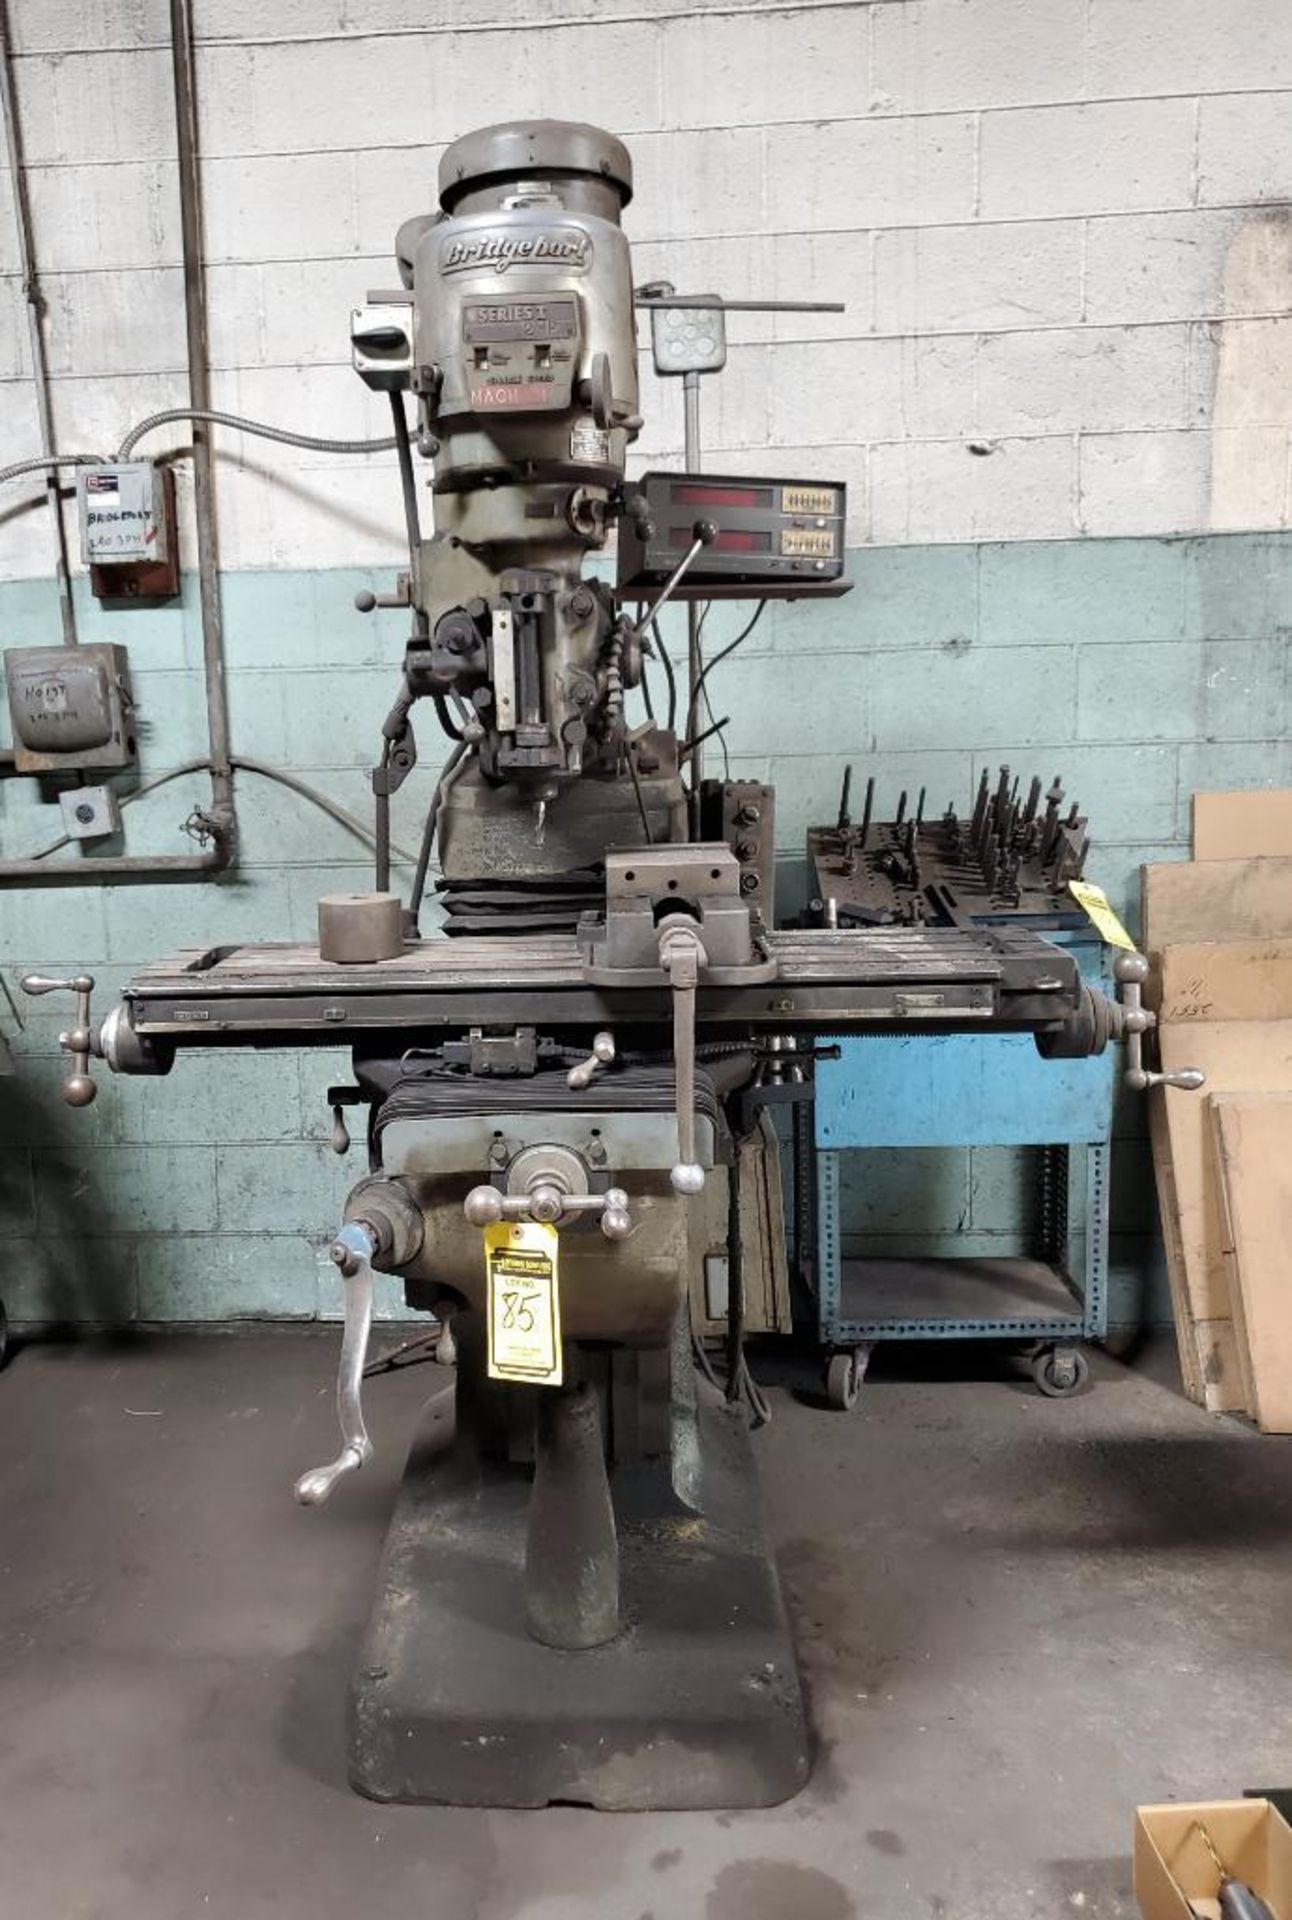 BRIDGEPORT SERIES I VERTICAL MILL; 2-HP, KNEE BED, SONY MAGNA SCALE DRO, POWER DRAW BAR WITH VISE